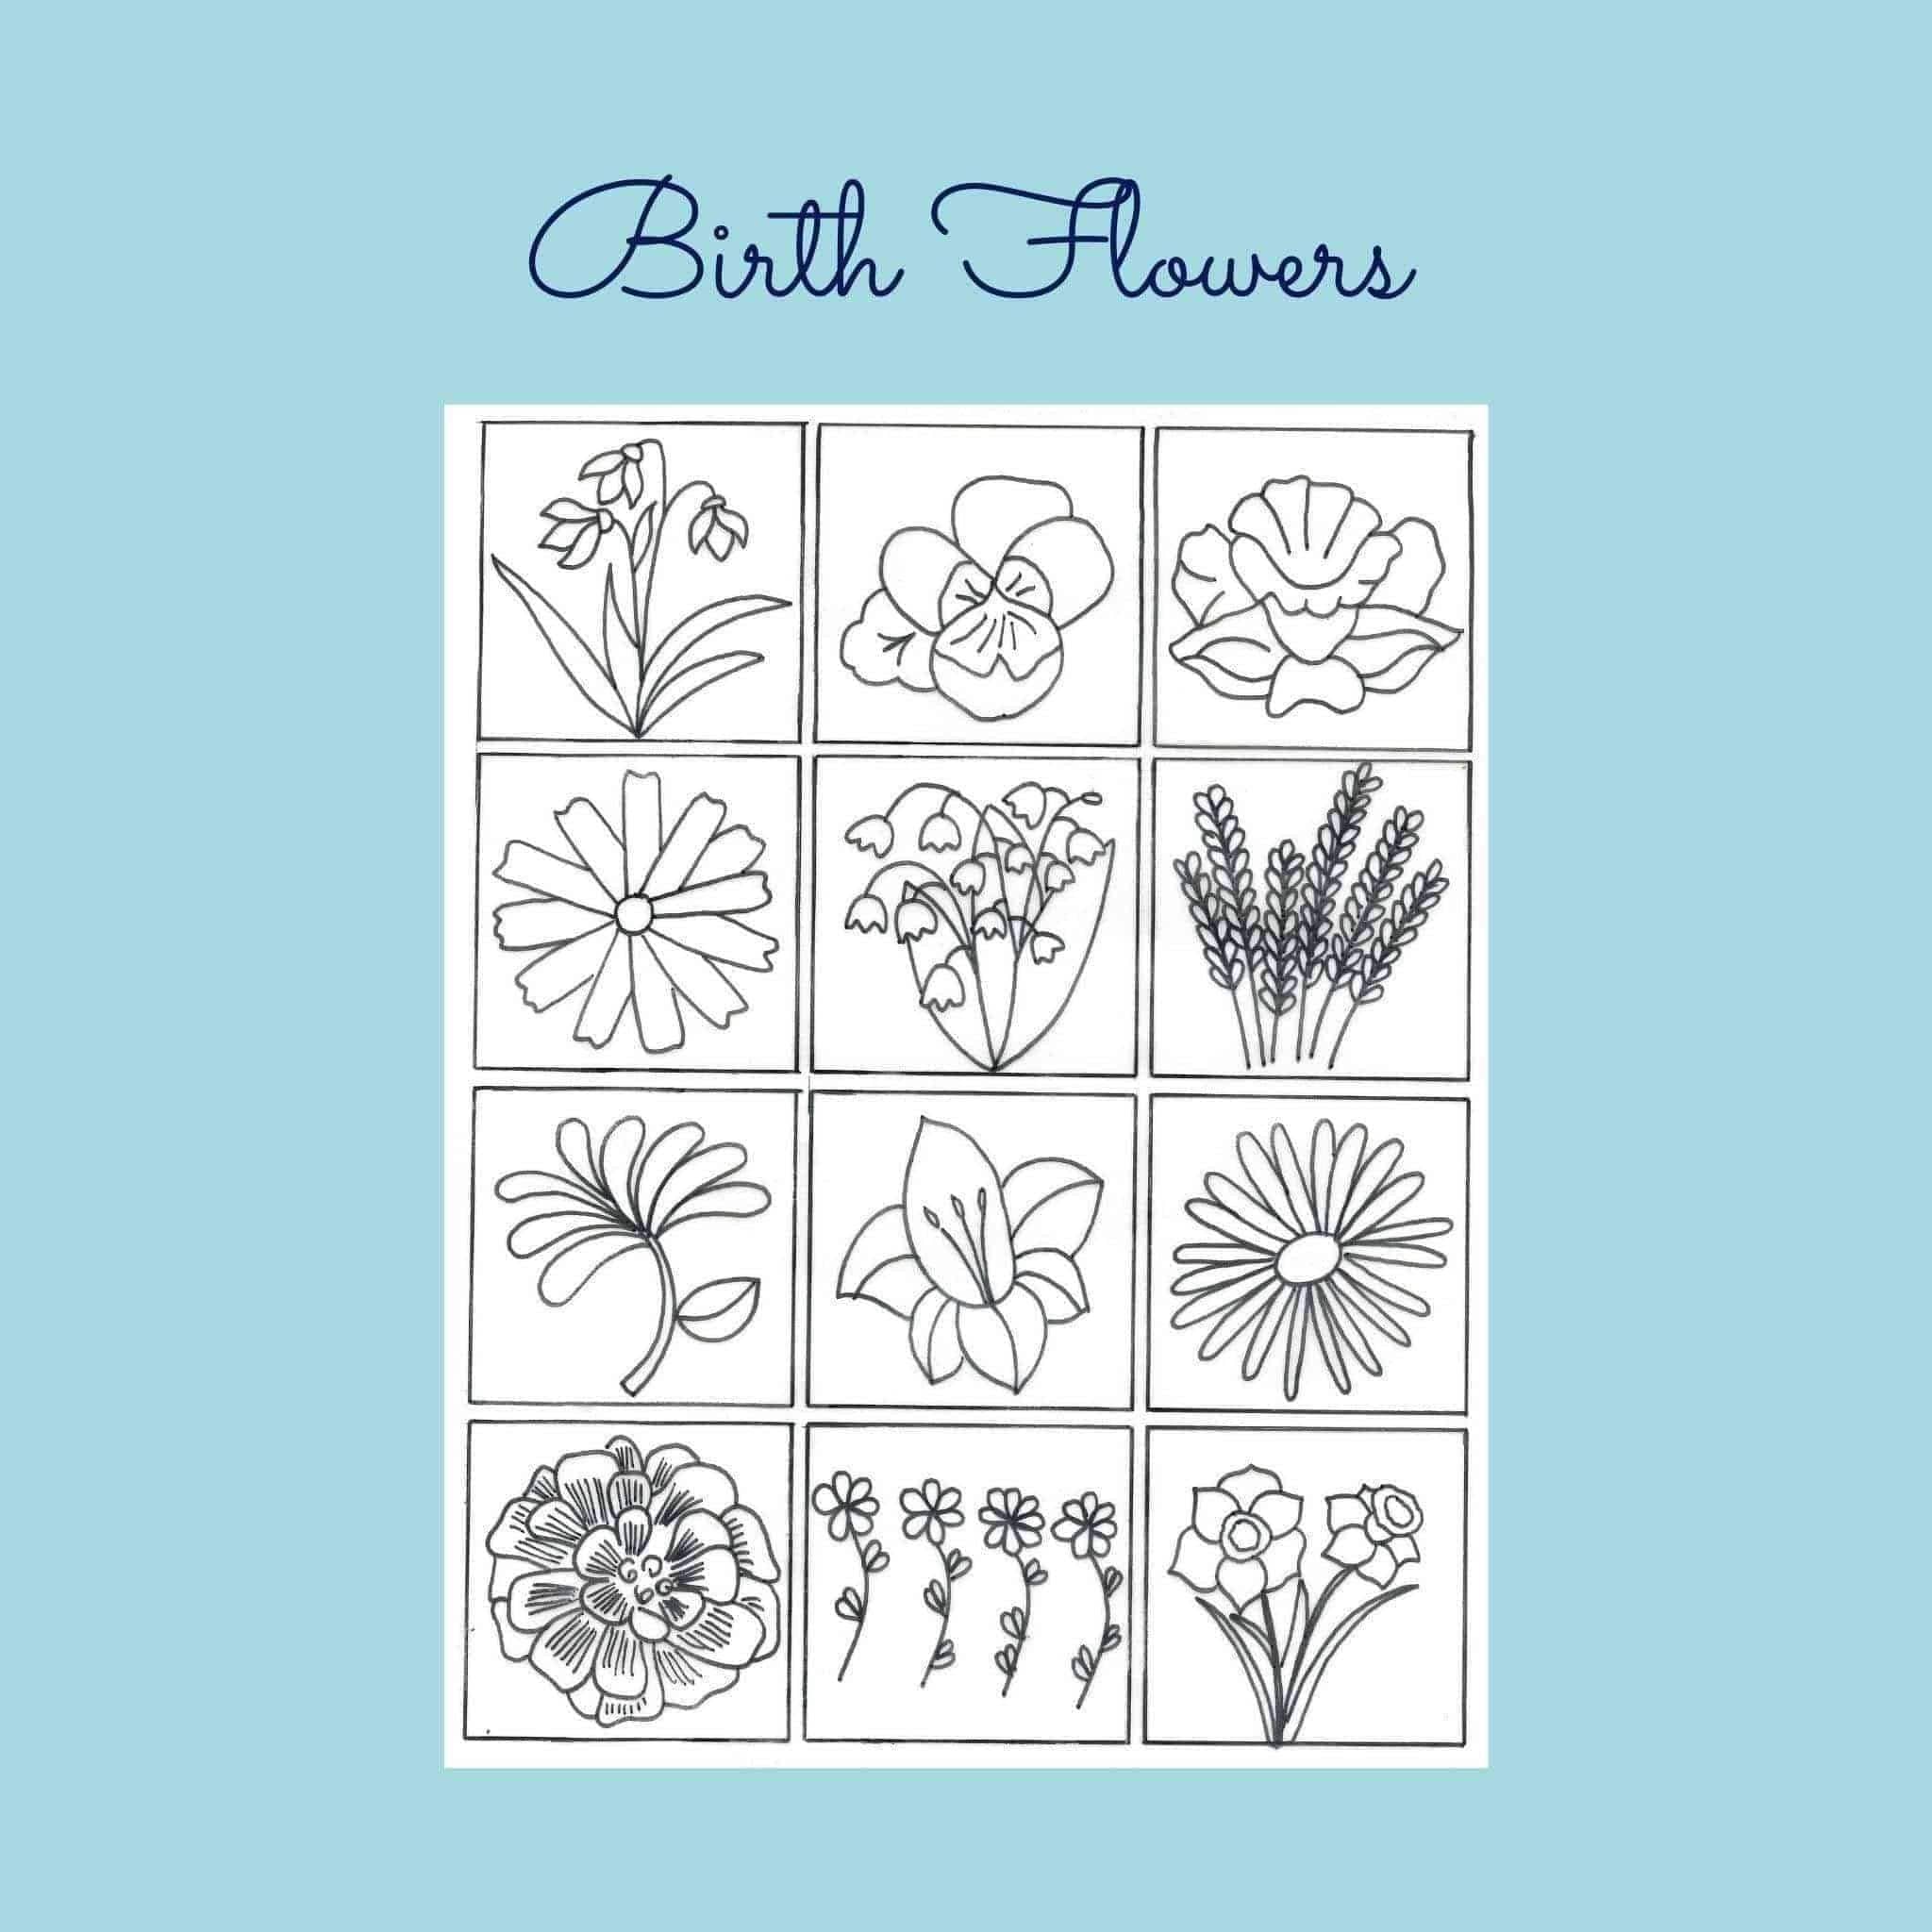 26 styles Funny Embroidery Kit for Beginners, Stamped Cross Stitch Kits for  Beginners Adults Patterned Needlepoint Embroidery Hoops Cloth Color Thread  Floss Flowers Plants Cactus